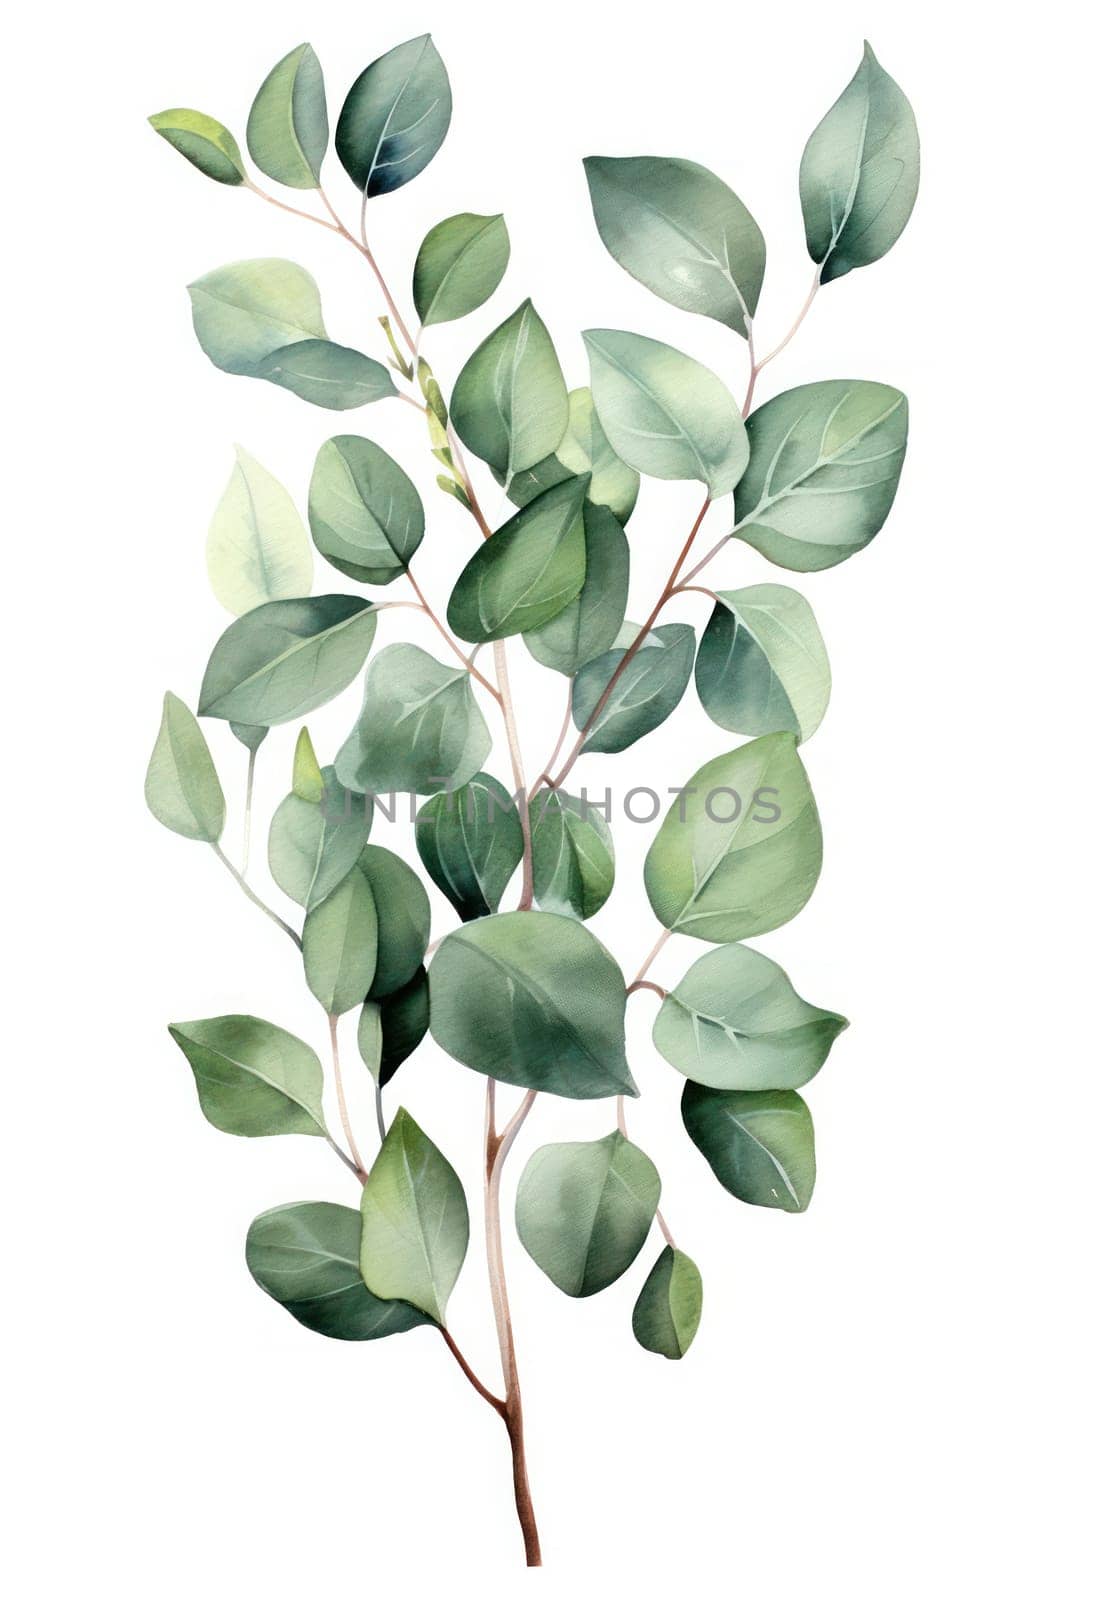 Nature's Delight: A Watercolor Floral Illustration of Exotic Eucalyptus Foliage, Gracefully Flowing on a Botanical Background